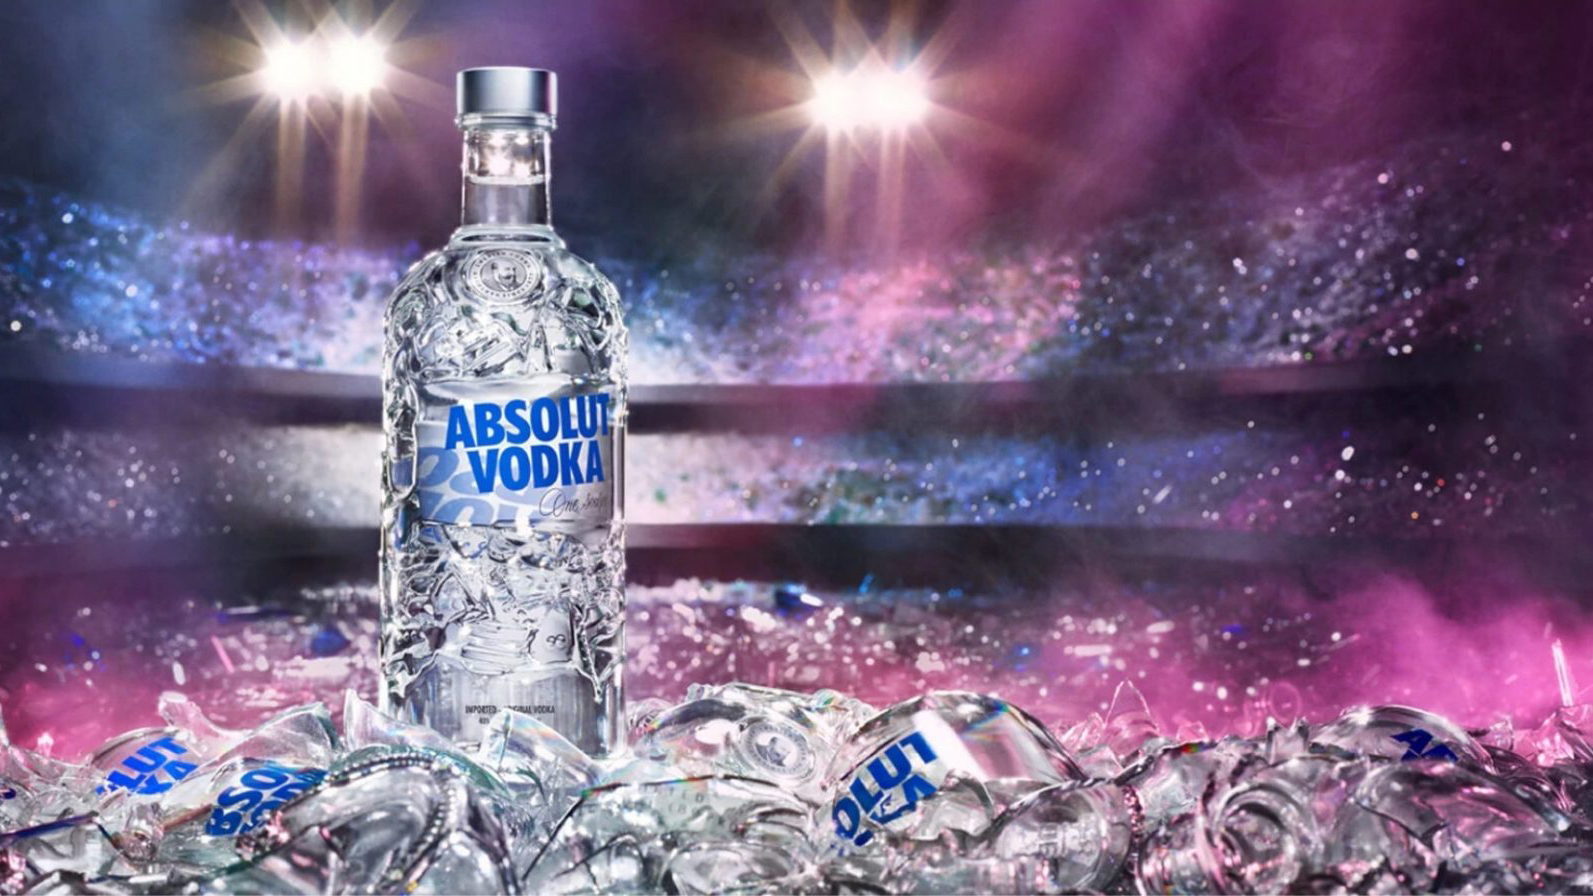 Absolut Comeback